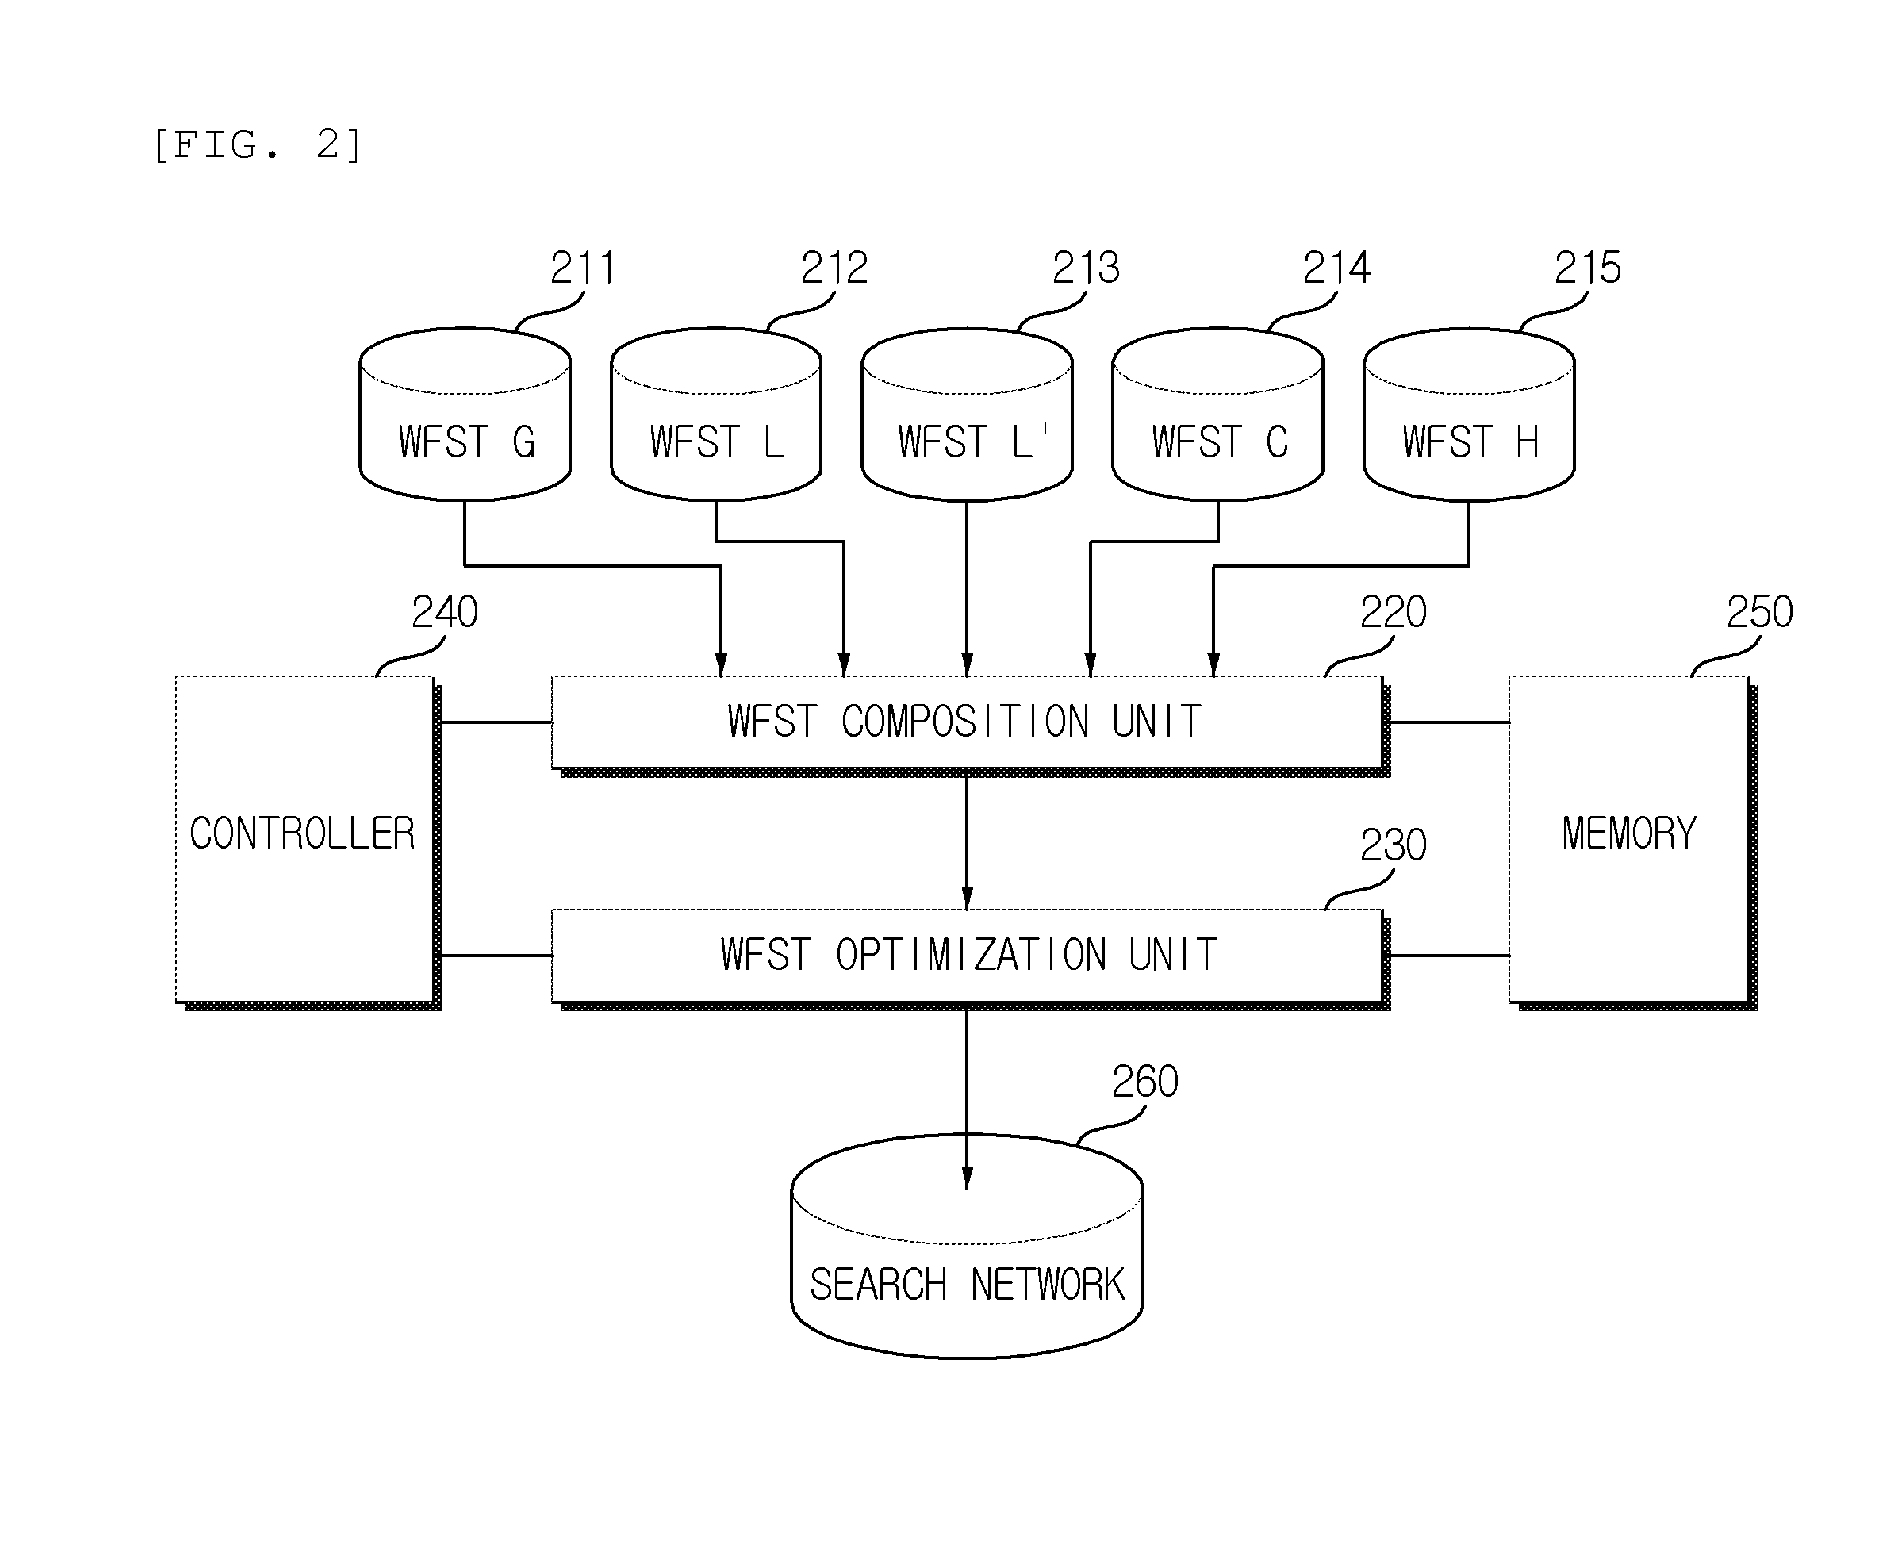 Method and system for generating search network for voice recognition